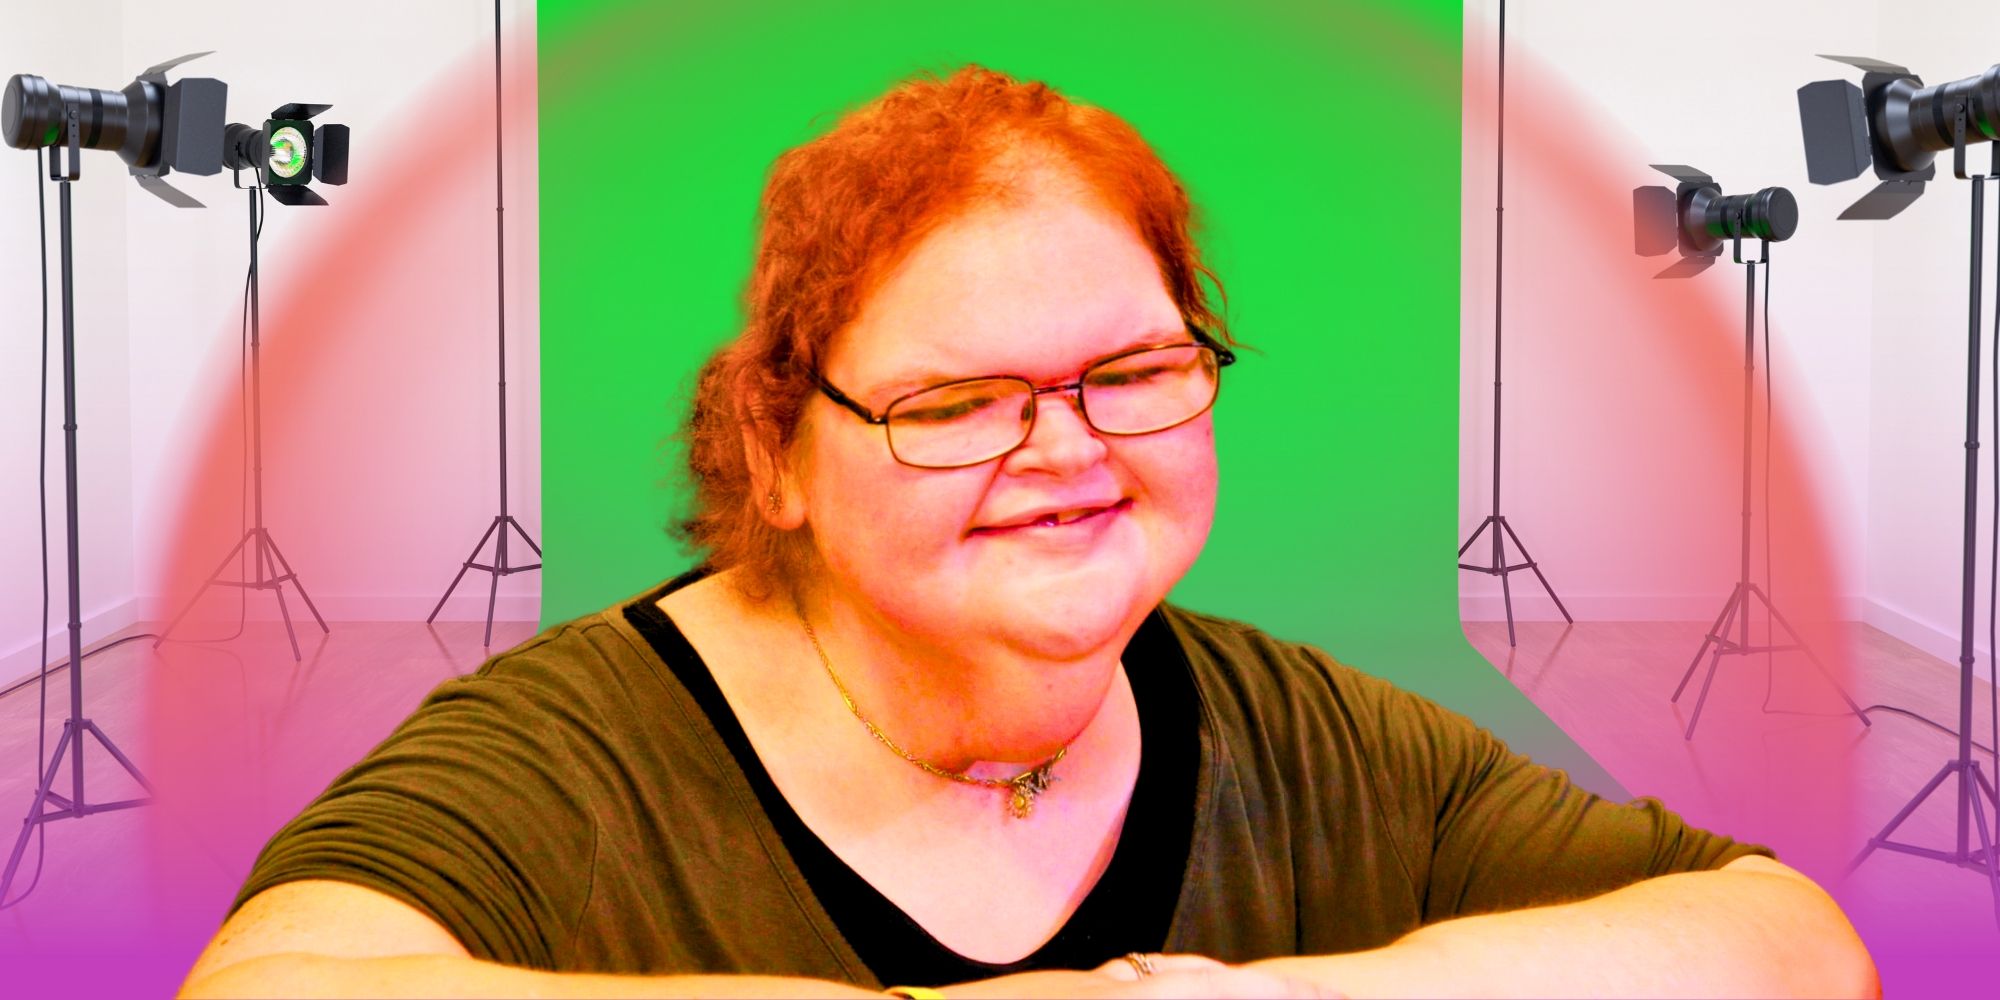 1000-Lb Sisters Tammy Slaton smiling in front of a green screen